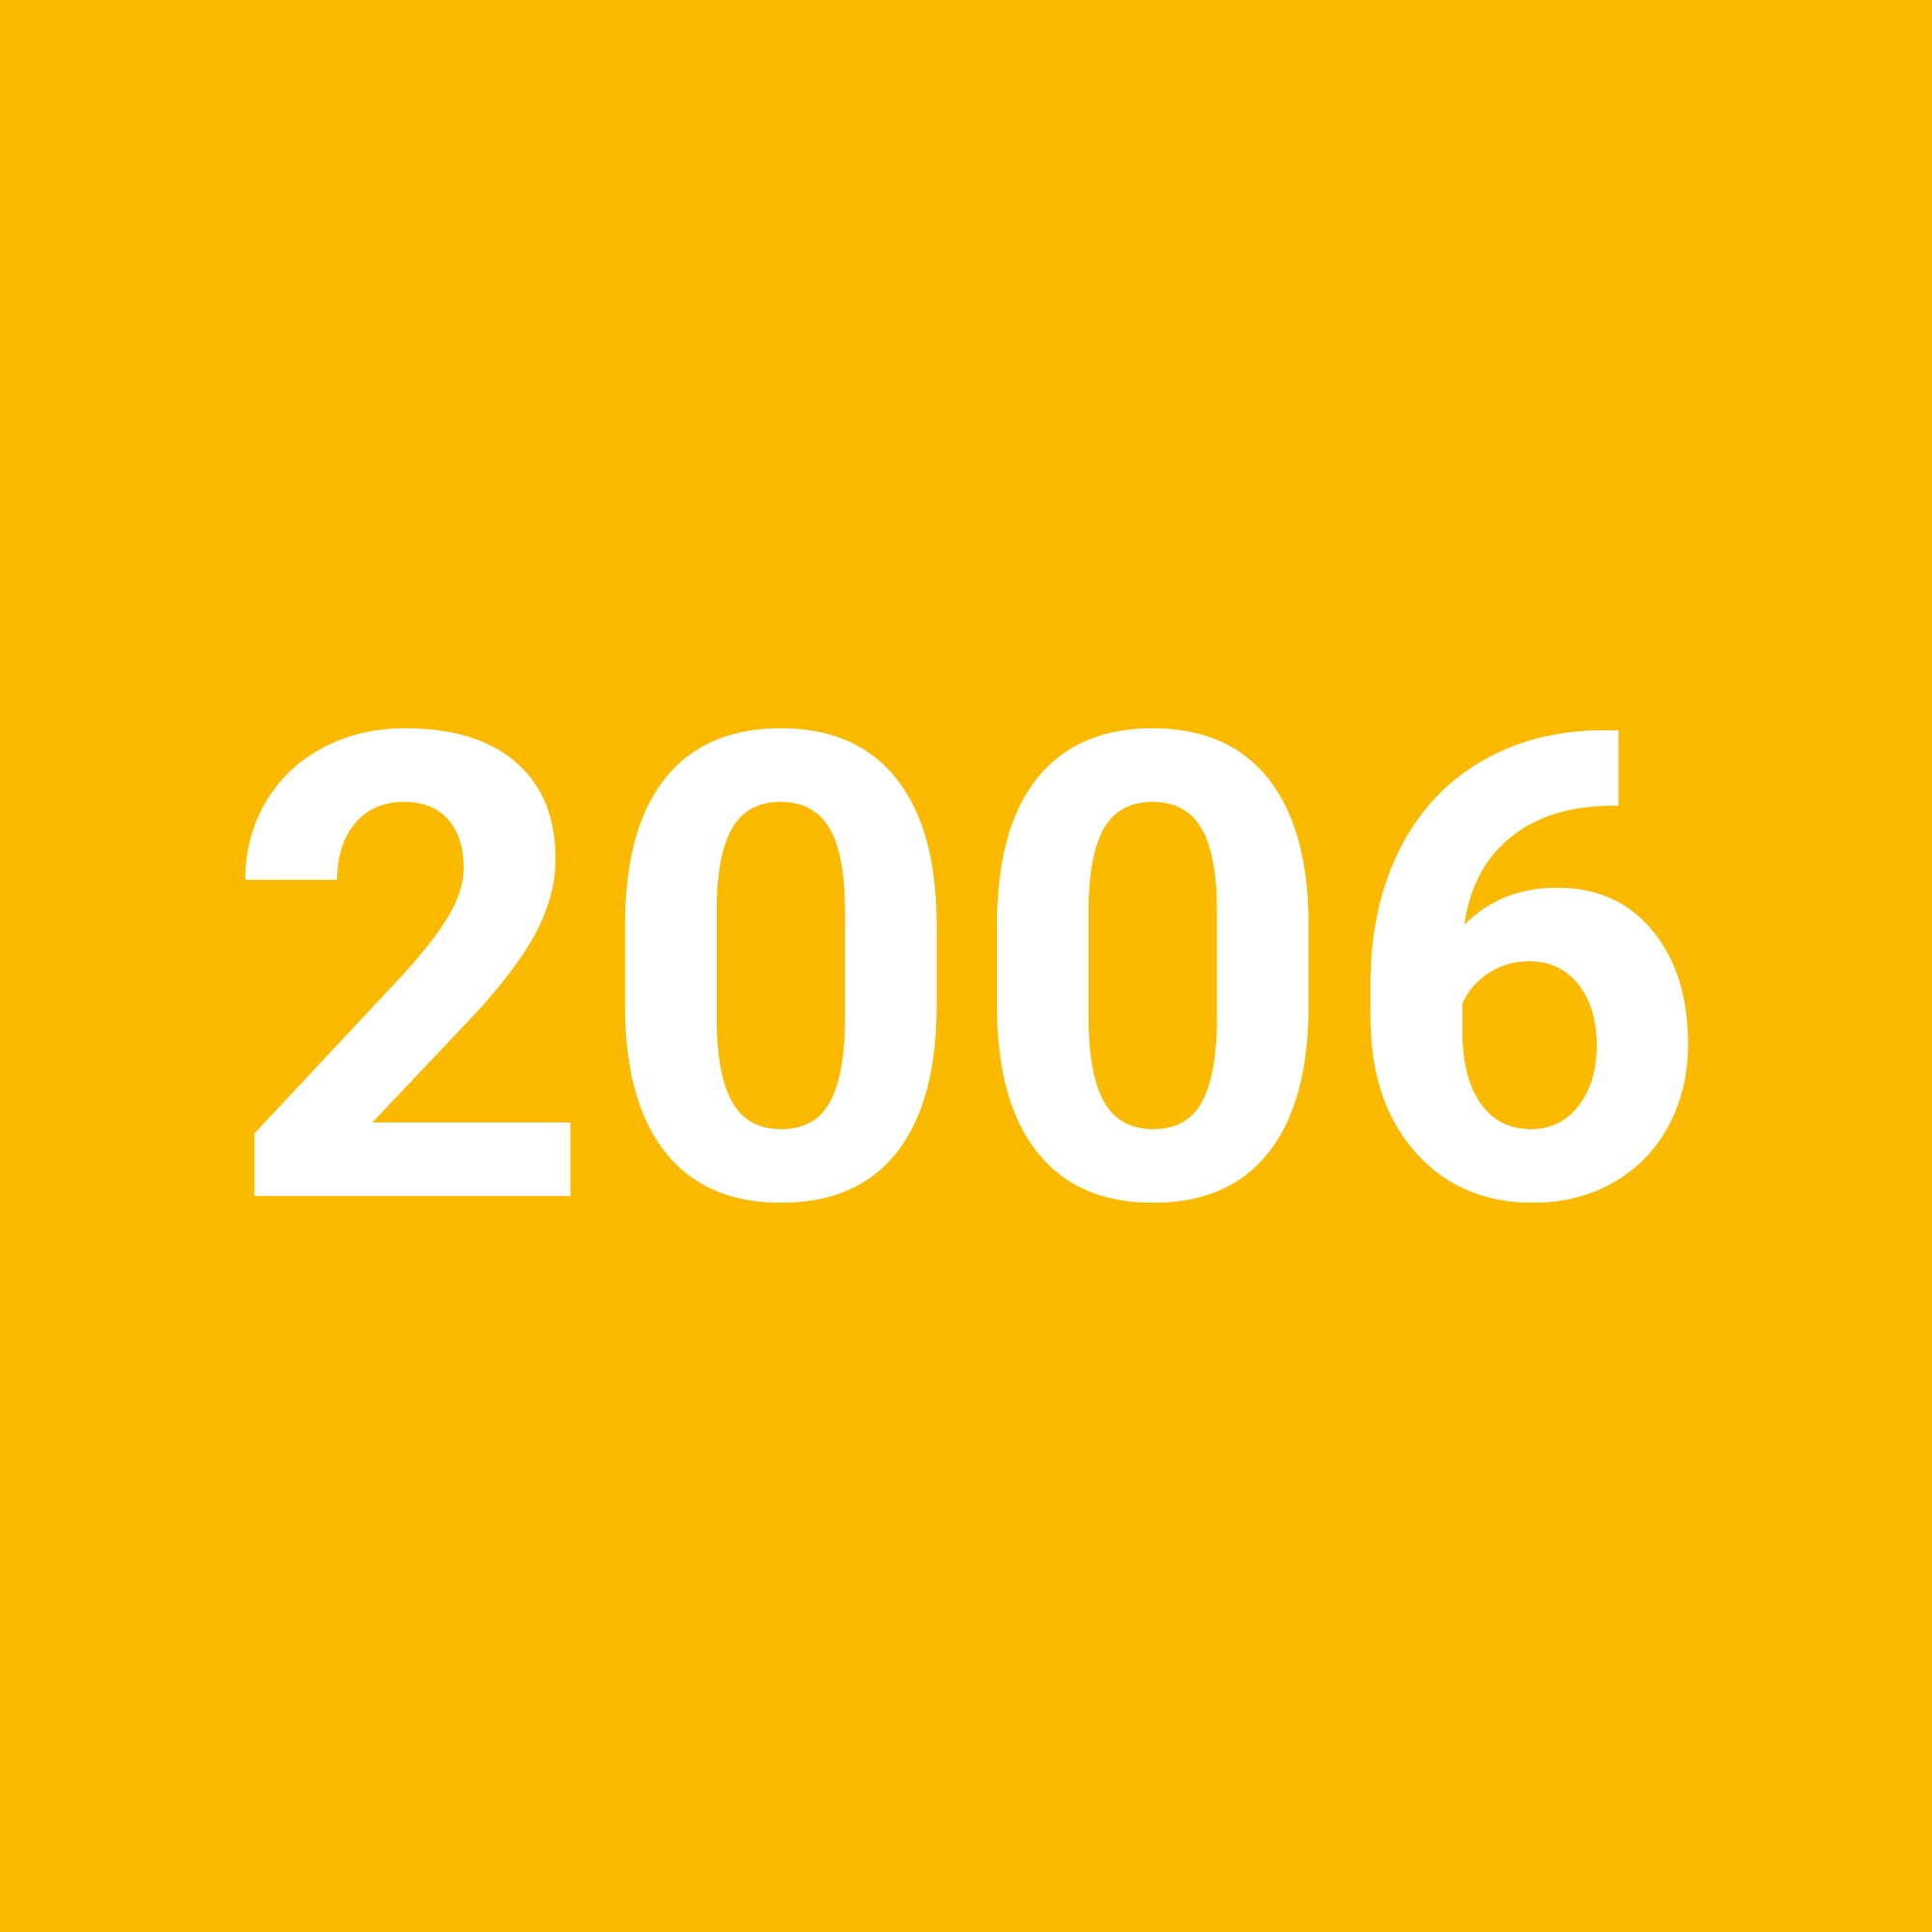 2006 on a yellow background